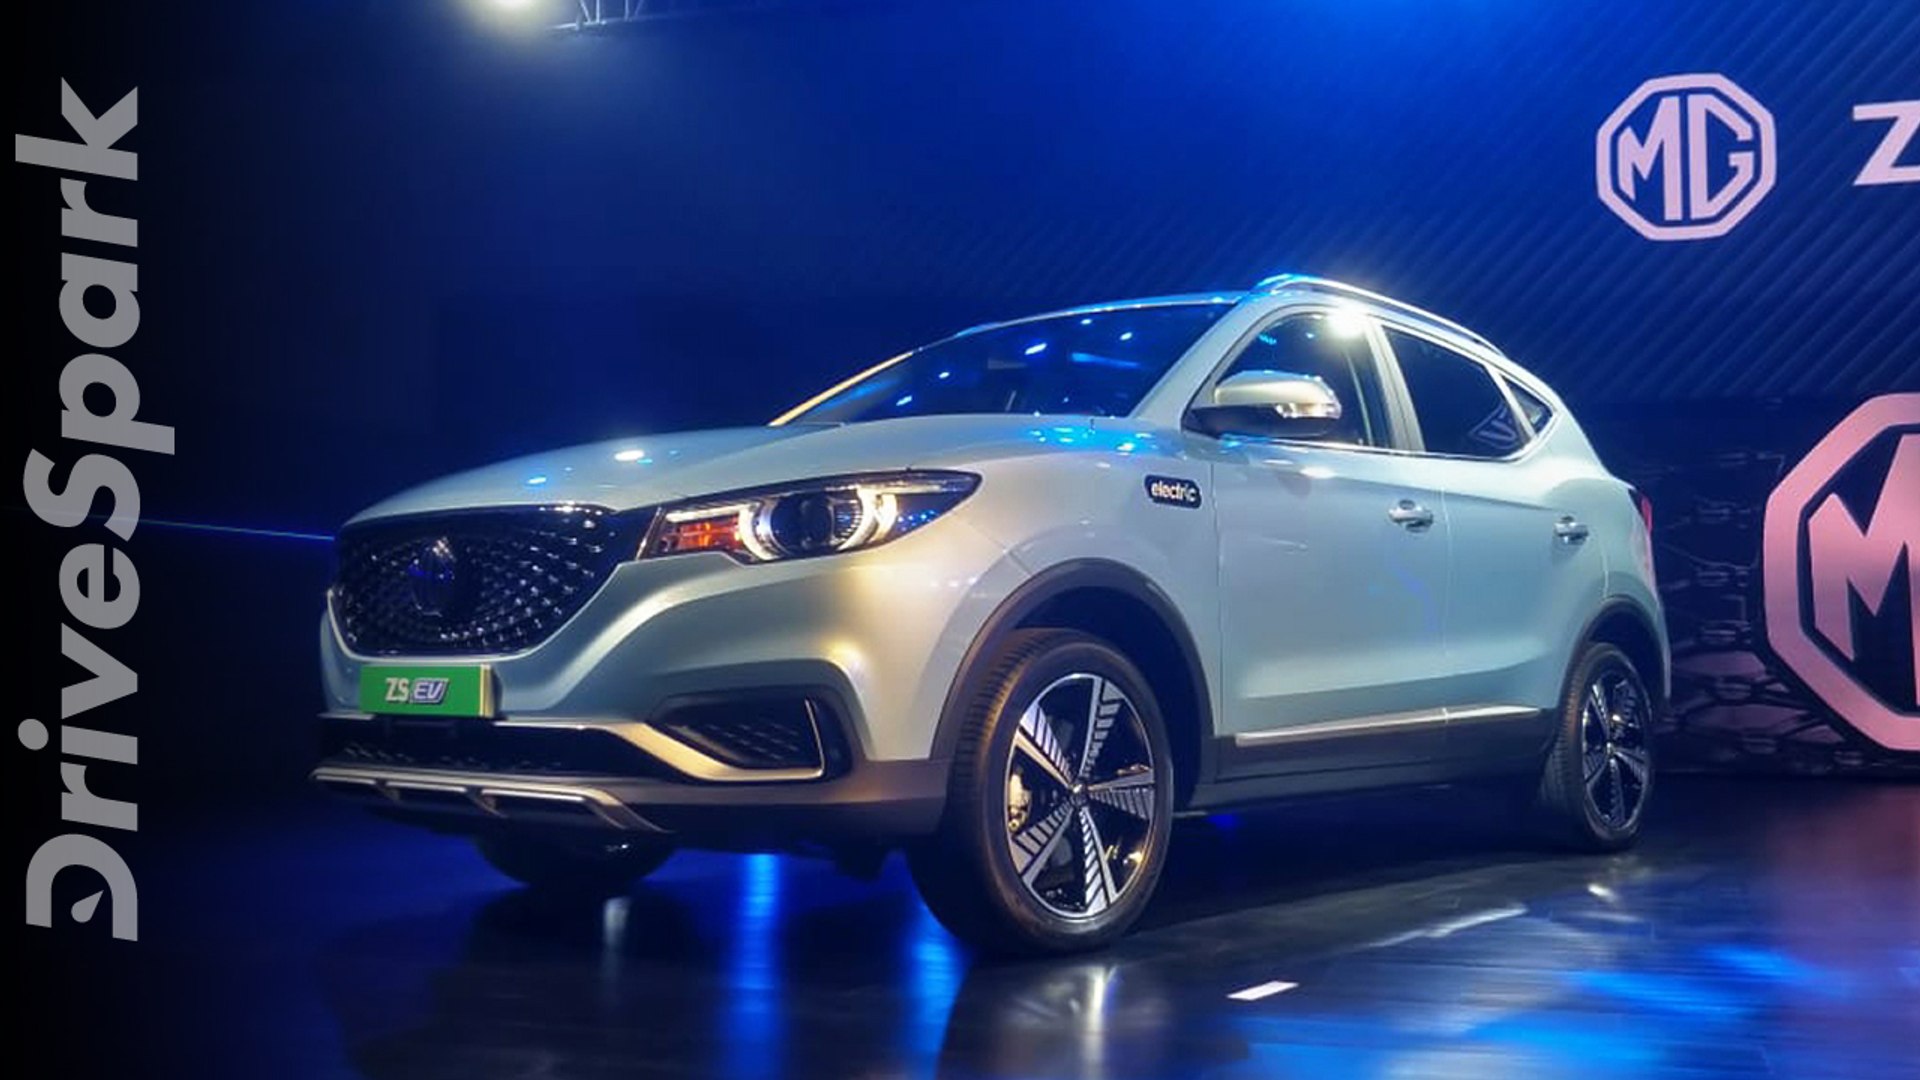 Mg Zs Ev Unveiled In India Walkaround Range Performance Features Specifications Details